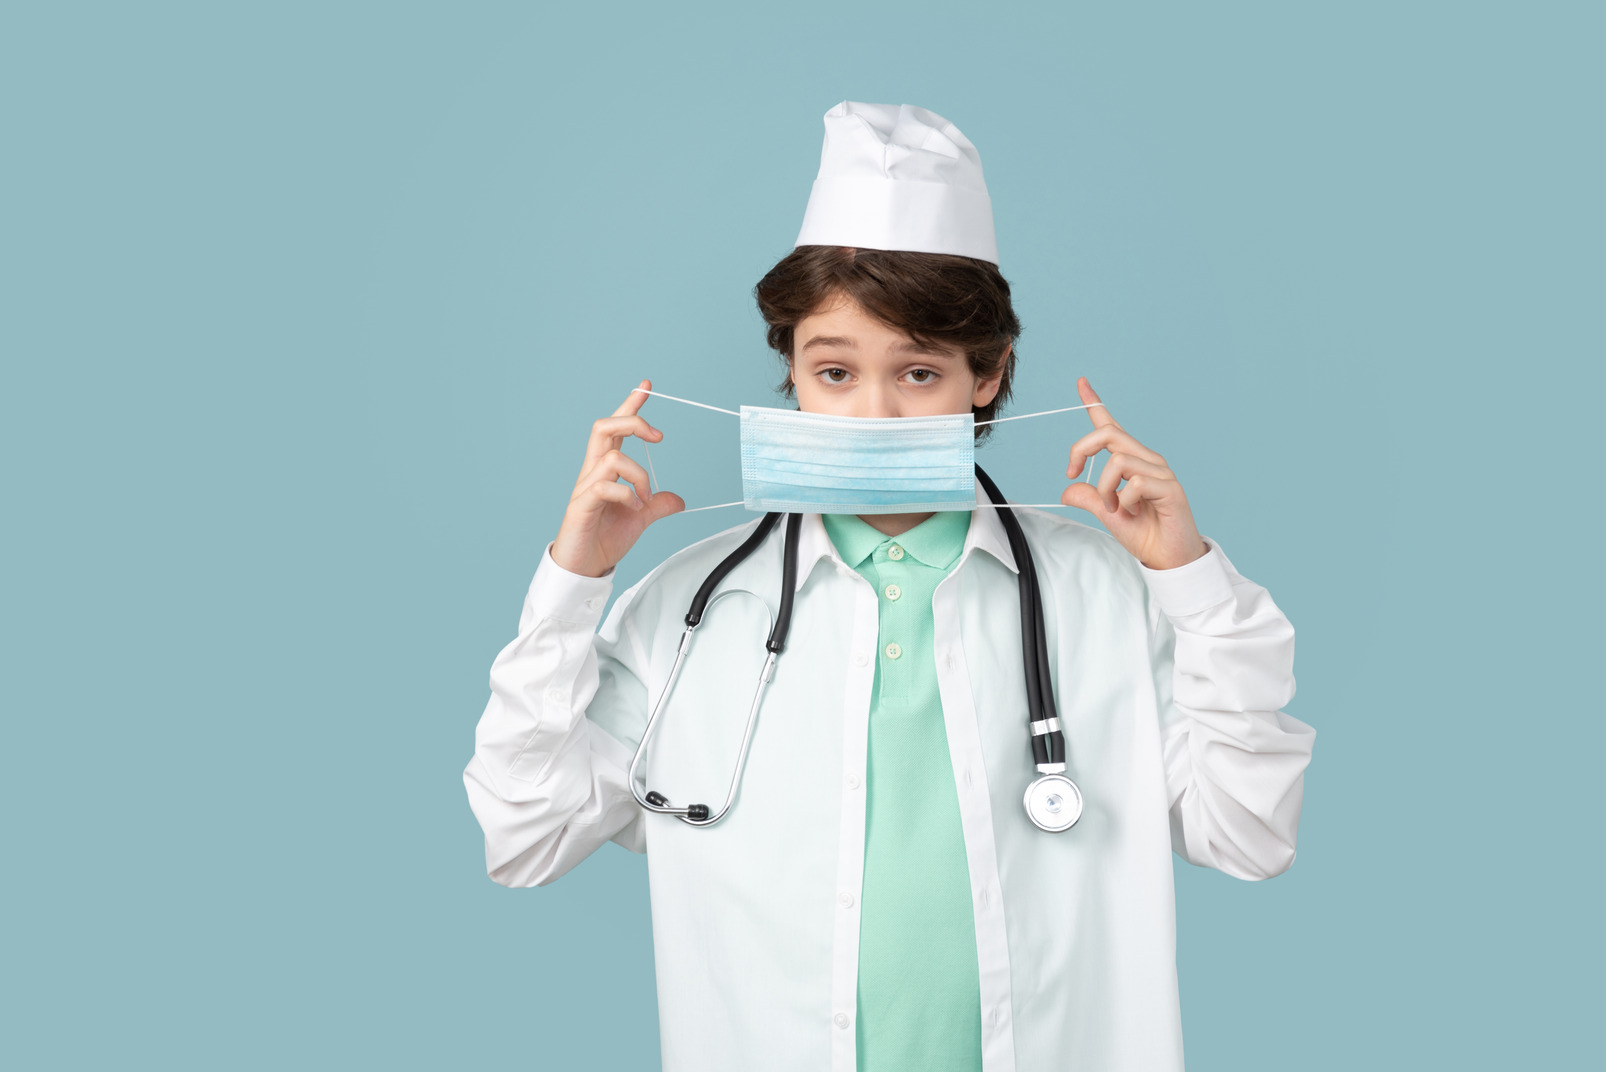 I know that a real doctor should wear a surgical mask during his rounds